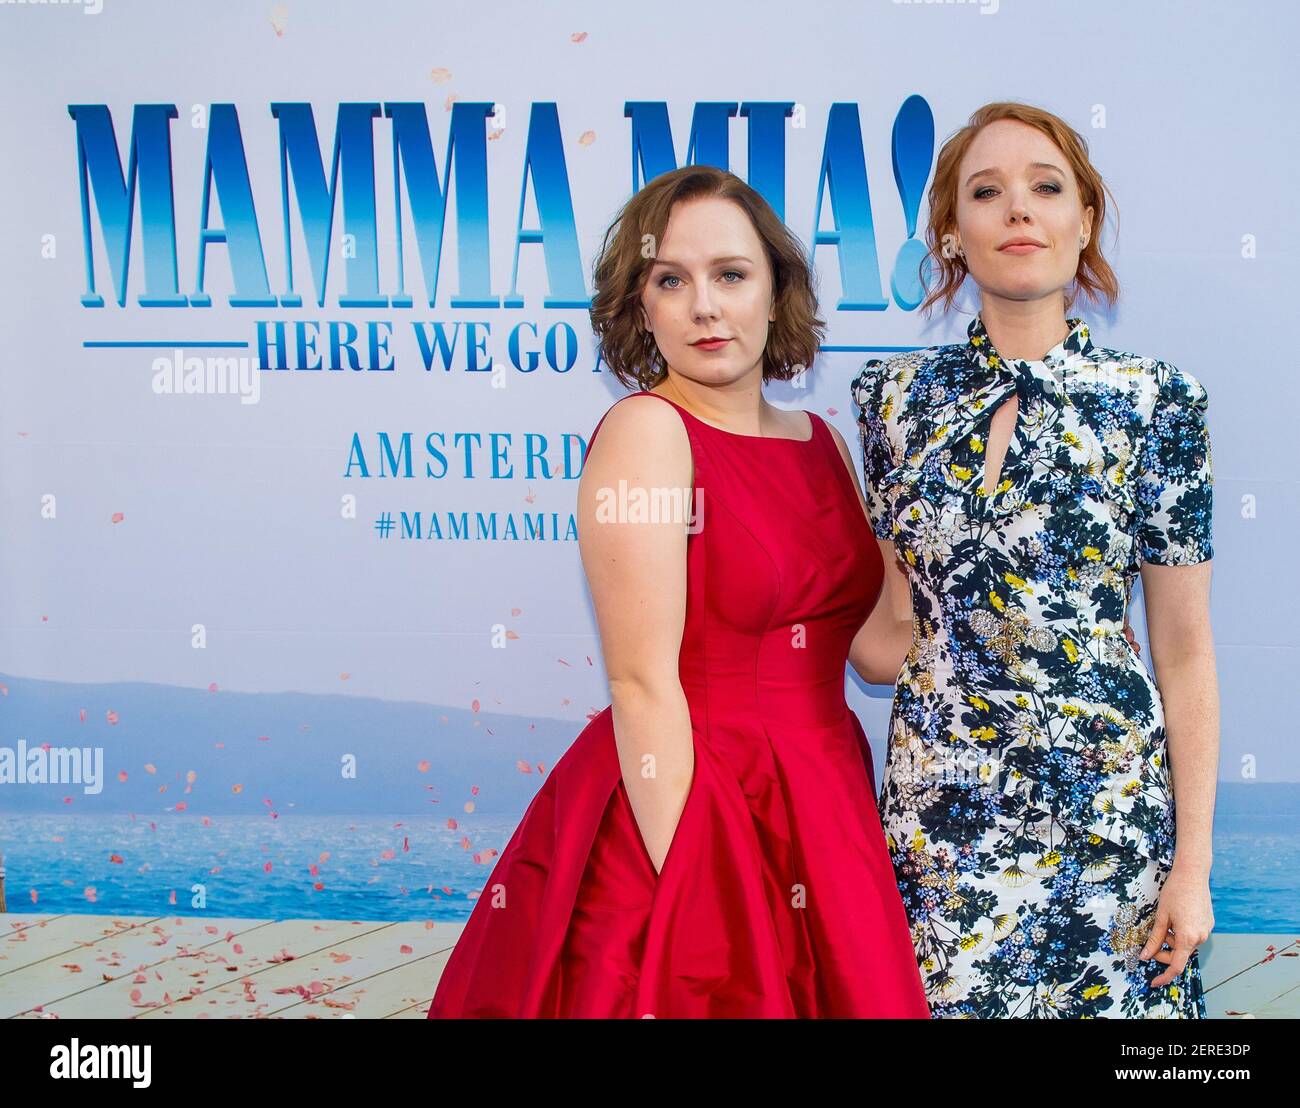 juni Metafor Skyldig Alexa Davies and Jessica Keenan Wynn on the red carpet during the premiere  of movie Mamma Mia! Here We Go Again at Tuschinski Theater in Amsterdam,  The Netherlands. (Photo by DPPA/Sipa USA